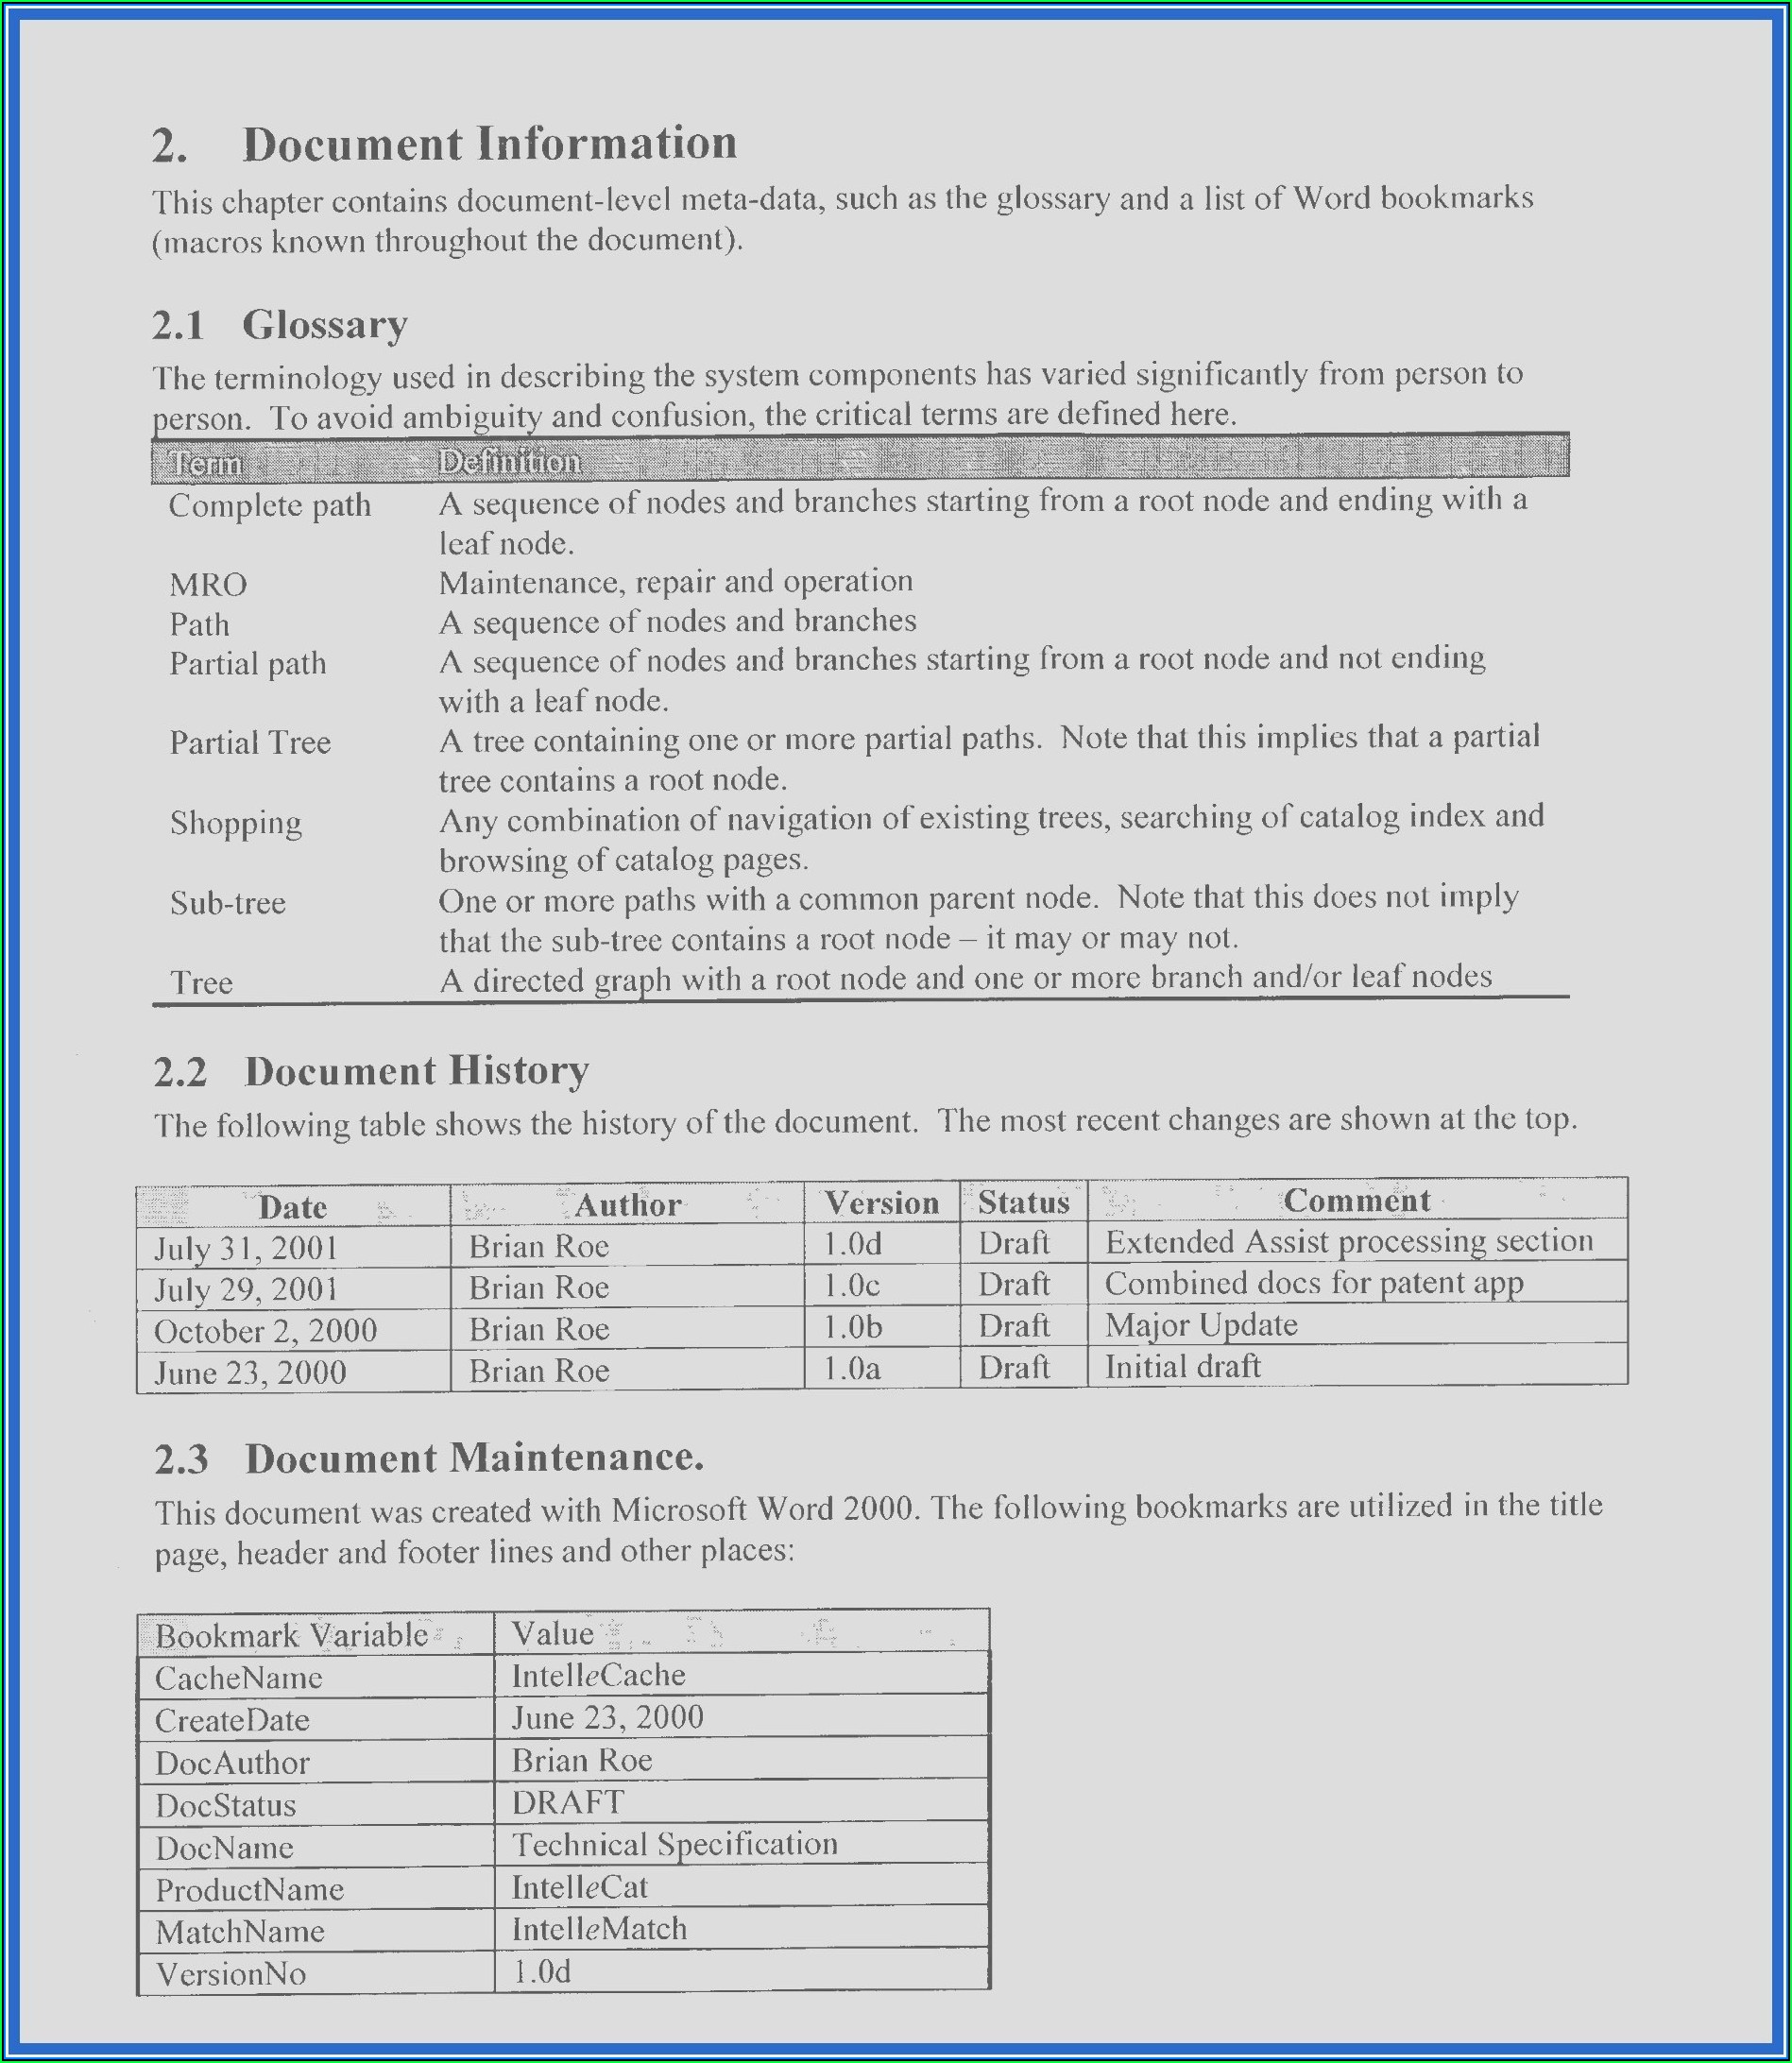 Free Fillable Resume Templates Download